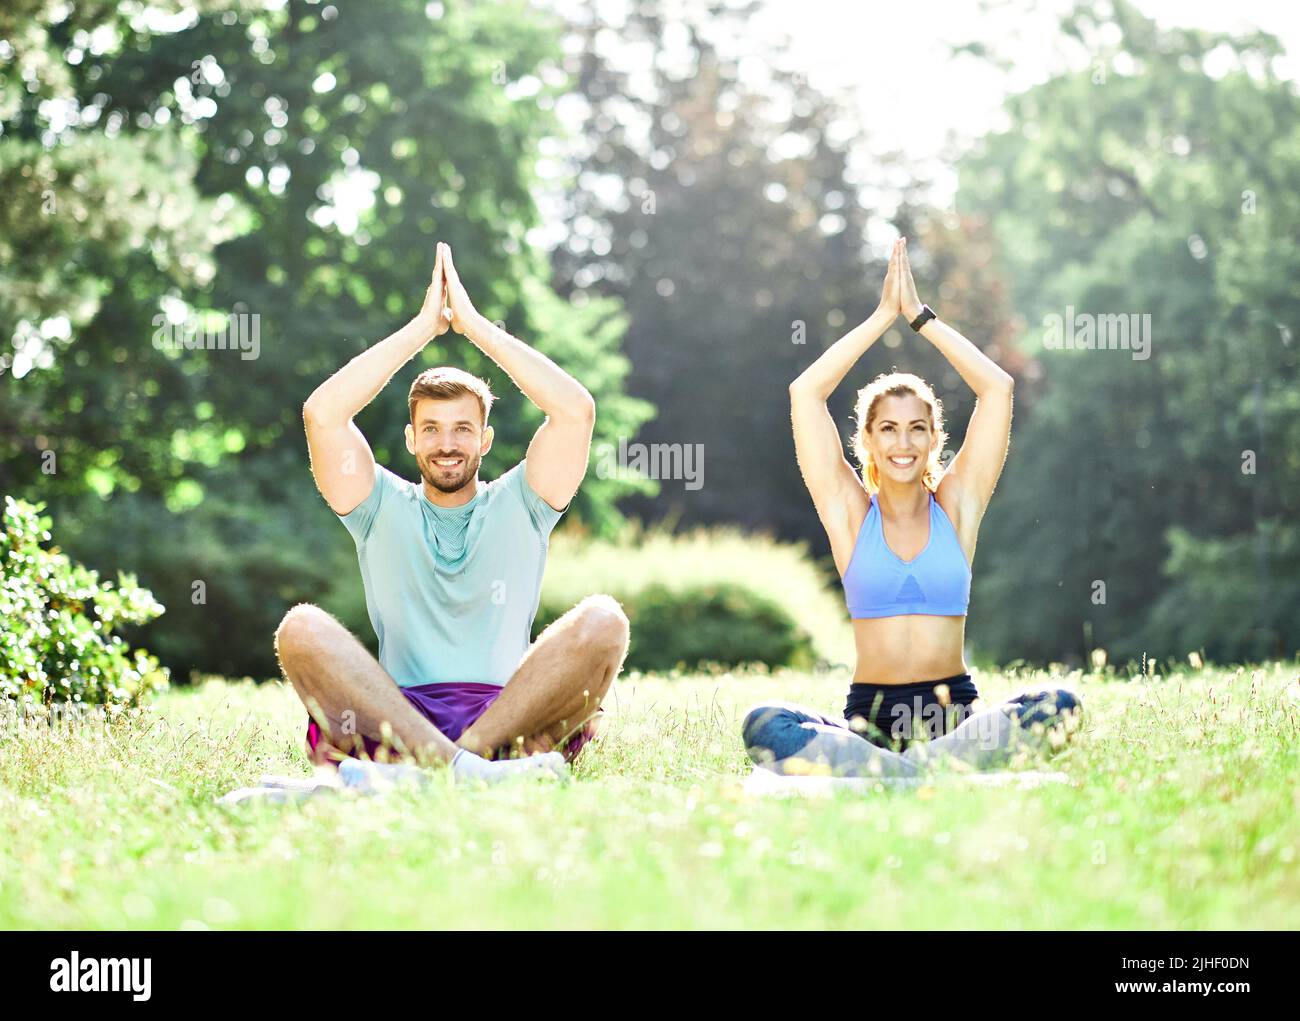 woman man couple yoga park outdoor lifestyle nature healthy fitness sport health exercise relaxation Stock Photo